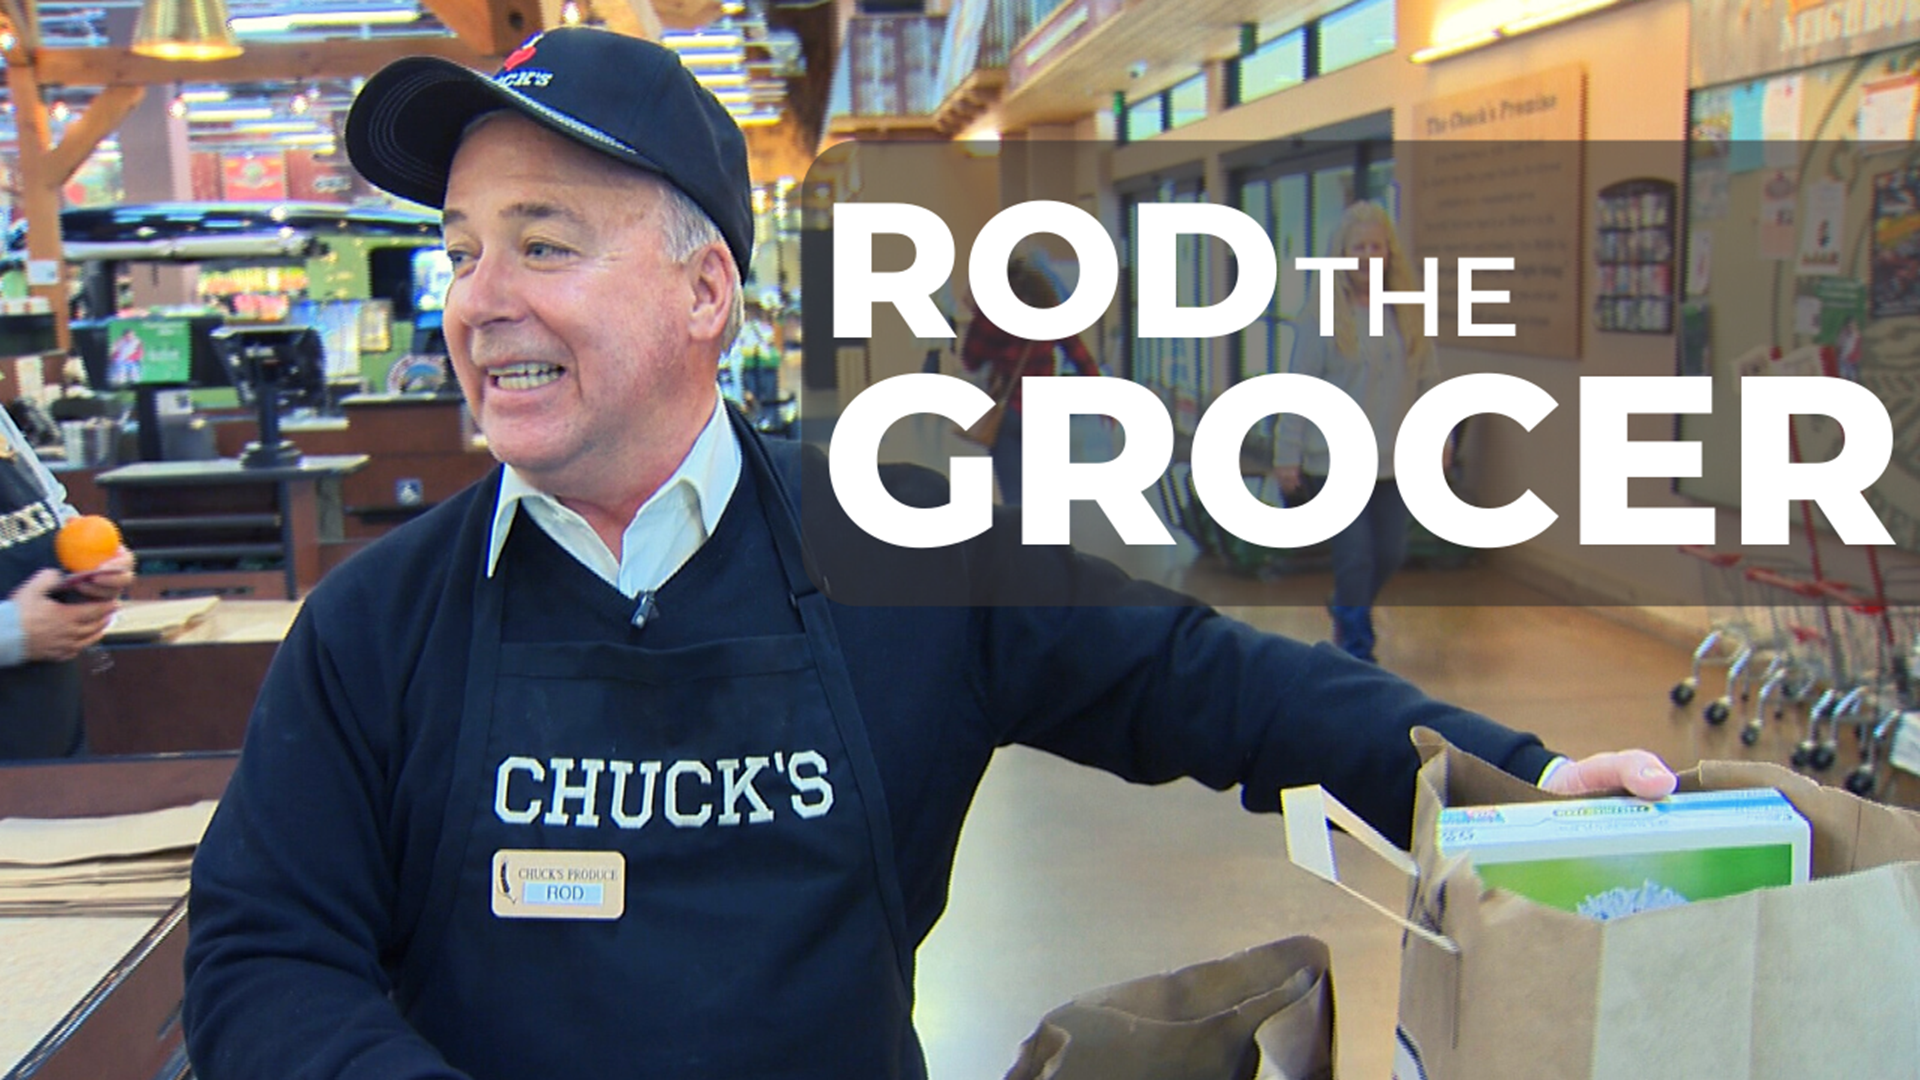 Rod tries the grocery business and learns how to bake bread, make orange juice, and pick the perfect produce.